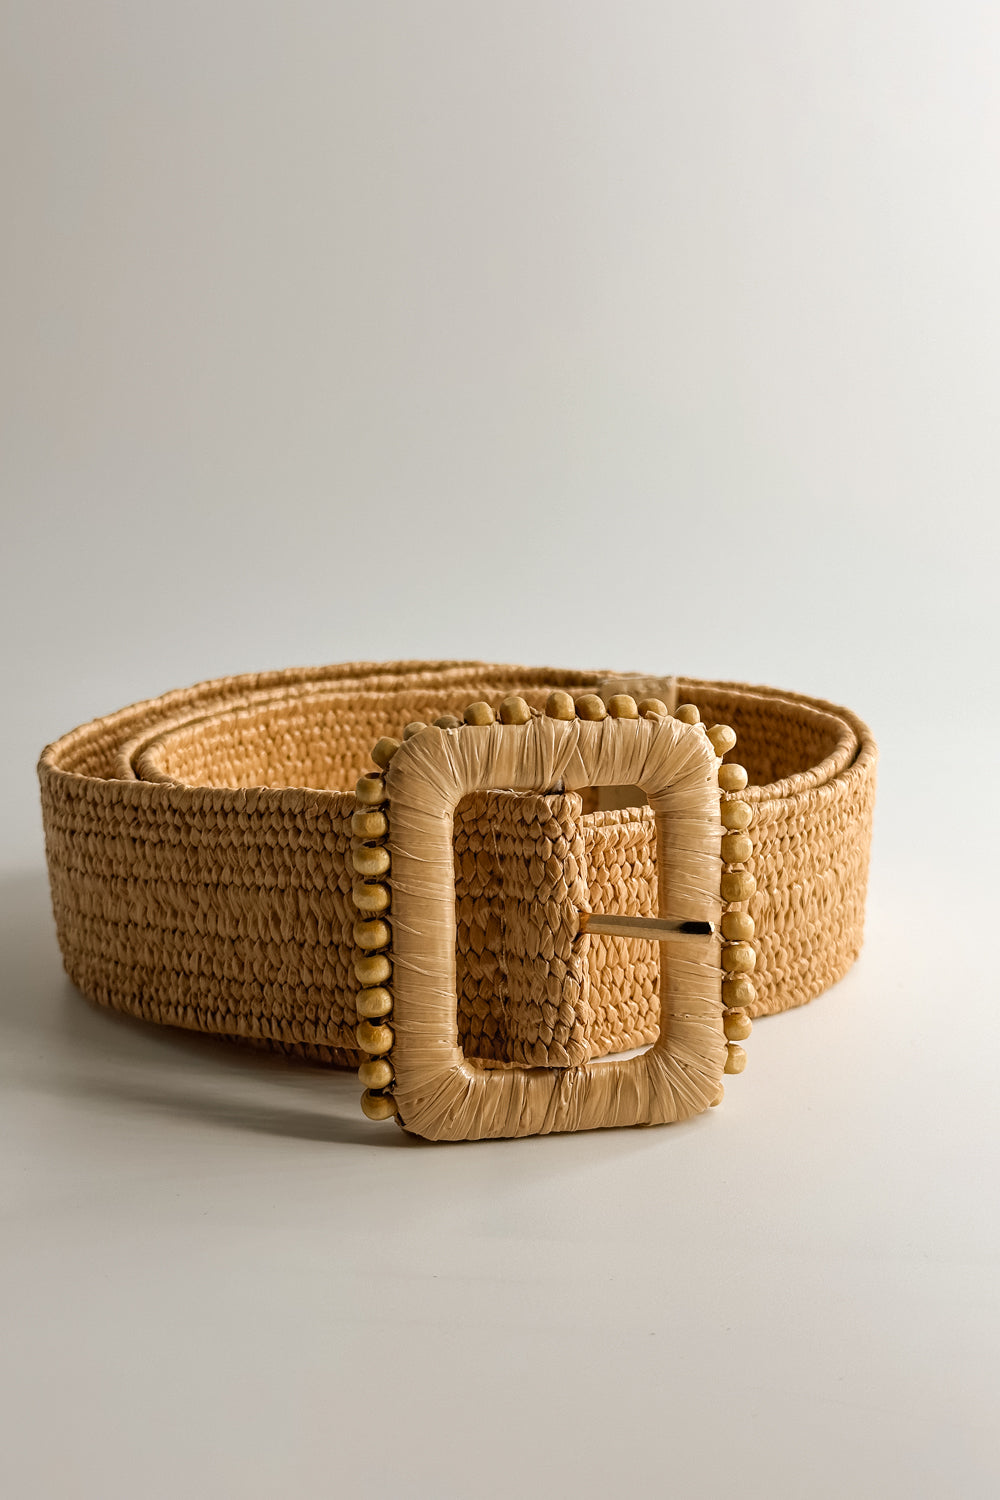 Front view of the Lyla Tan Rattan Beaded Belt which features Tan Woven Fabric and Tan Rattan Adjustable Buckle with Wooden Bead Details